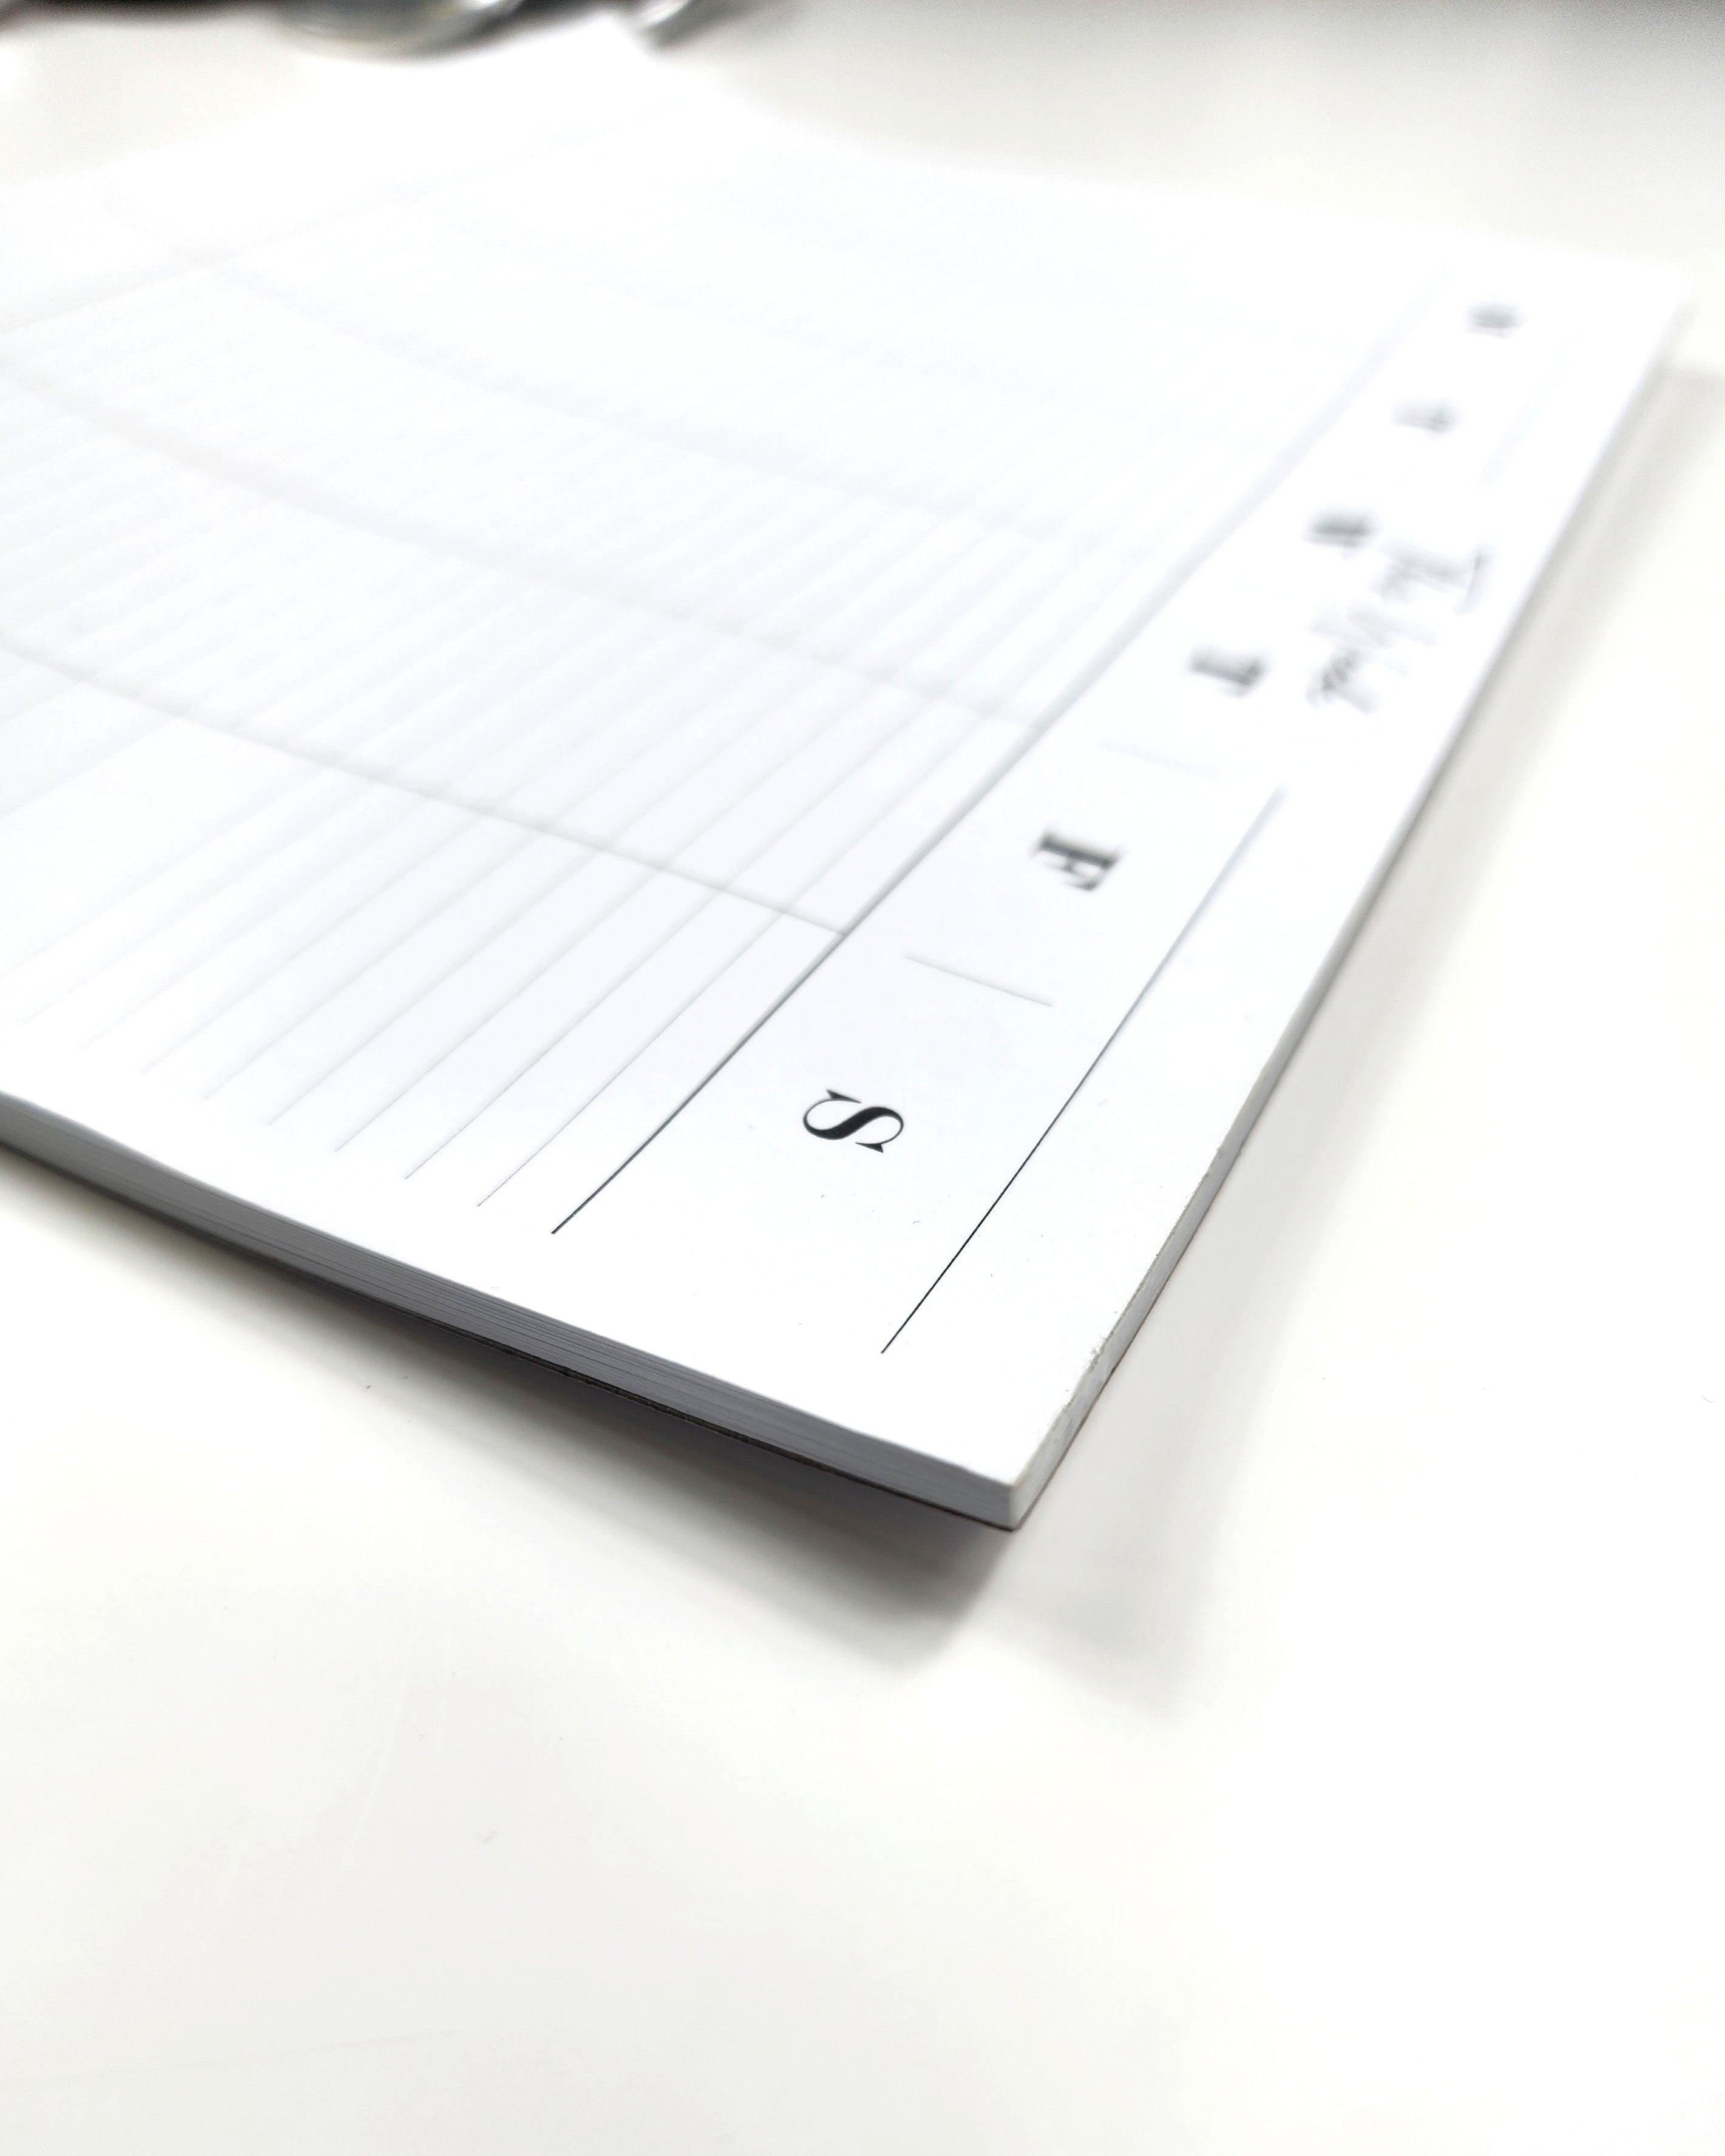 Weekly calendar desk pad for notes, tasks, and scheduling by Janes Agenda.